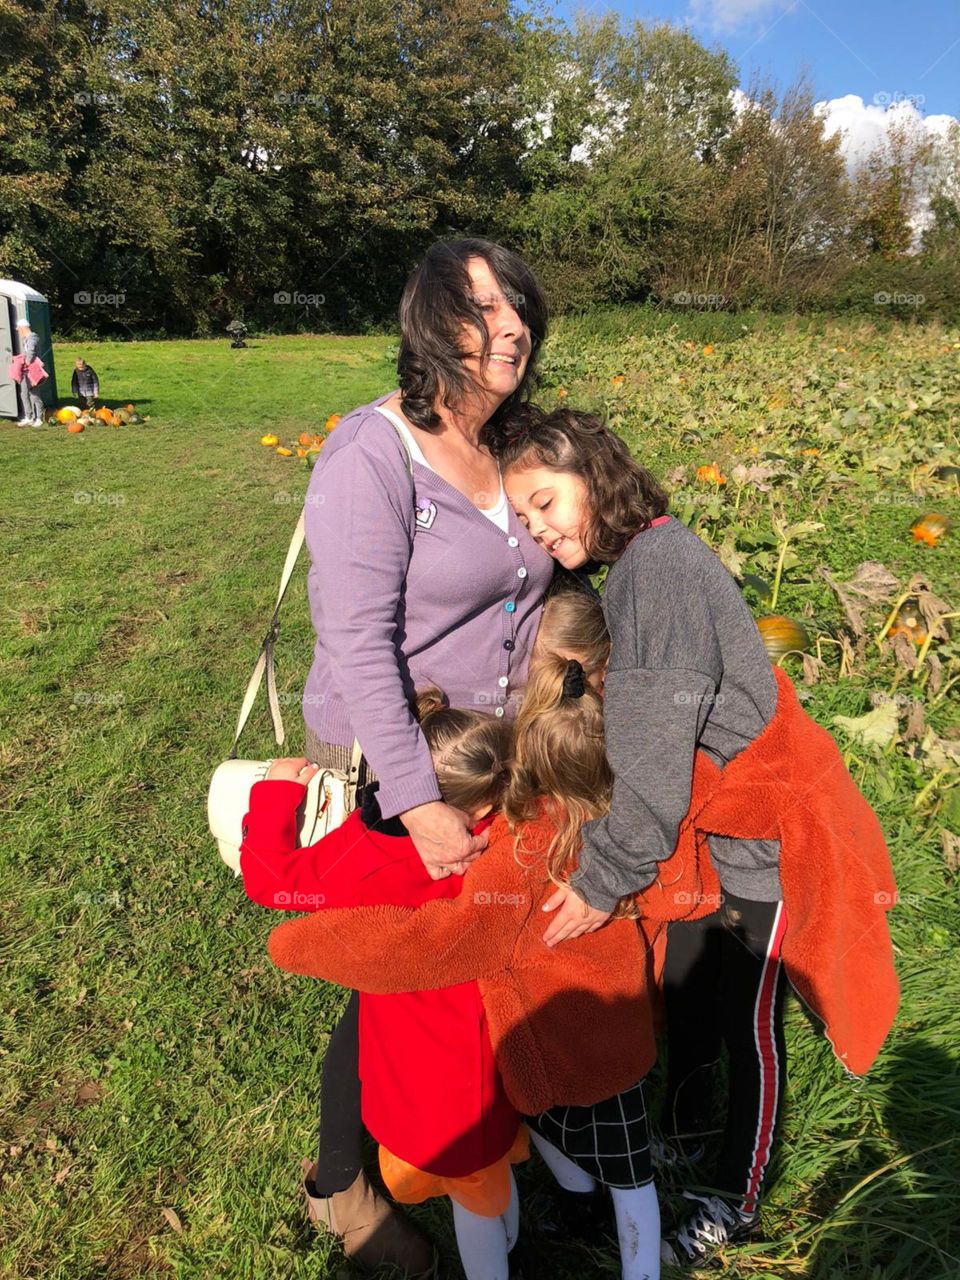 Best moment ever ‘ is when your grandchildren start hugging you ‘ this is priceless 🥰